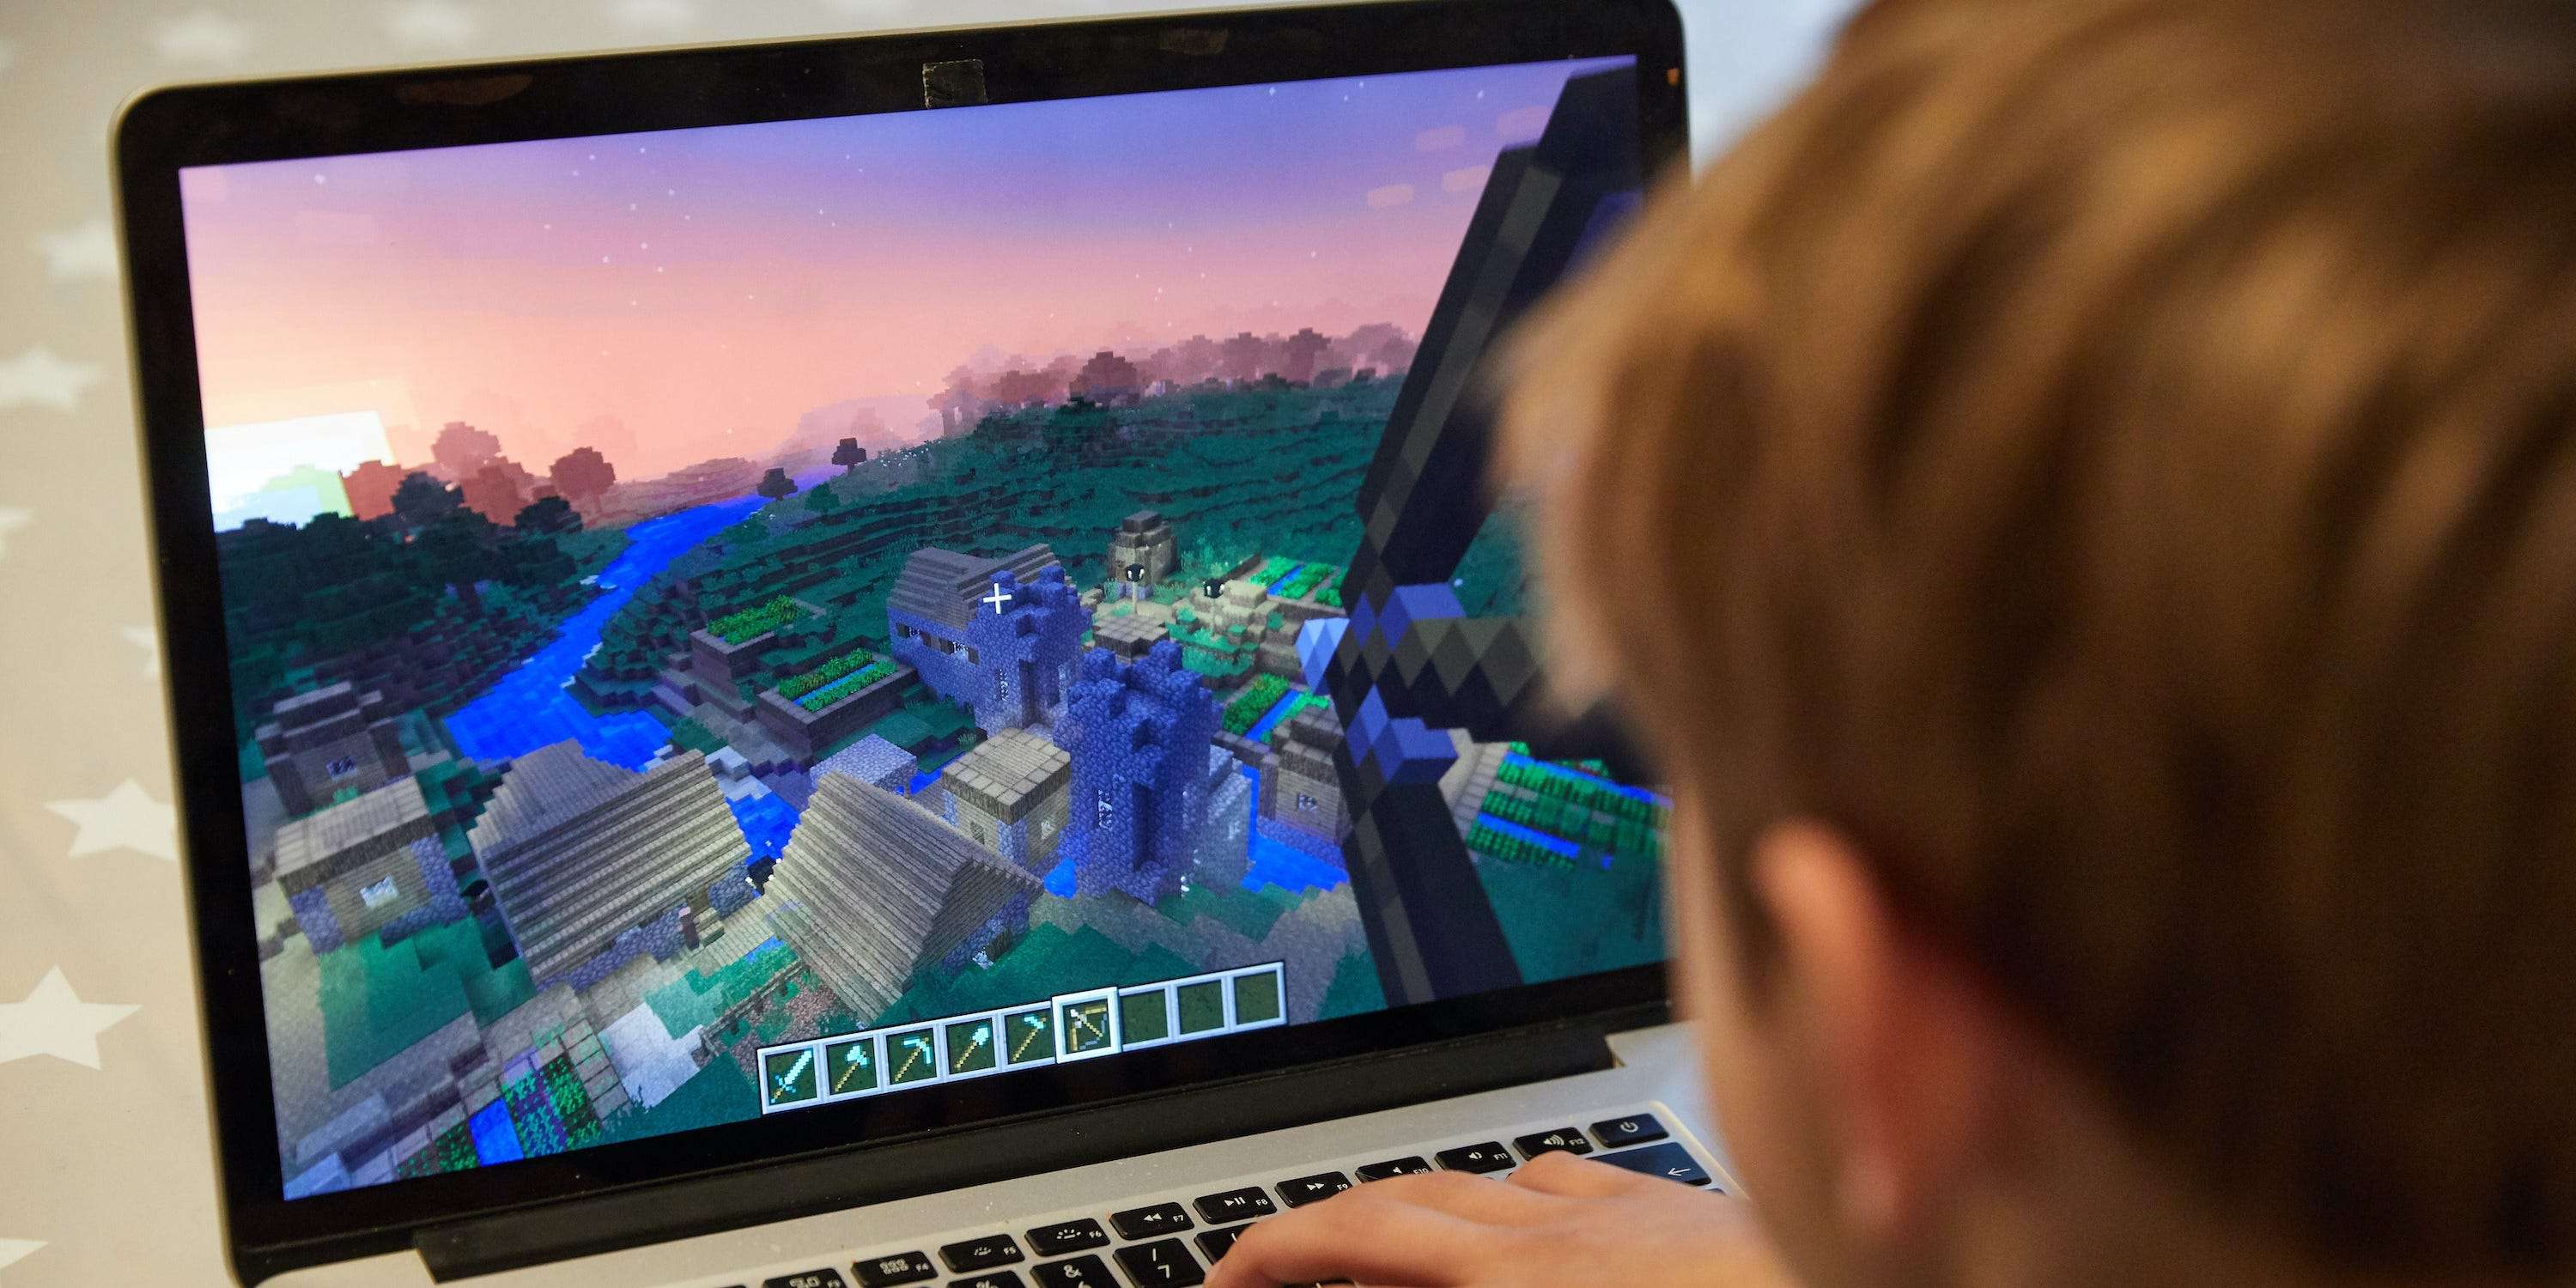 recording software for minecraft mac